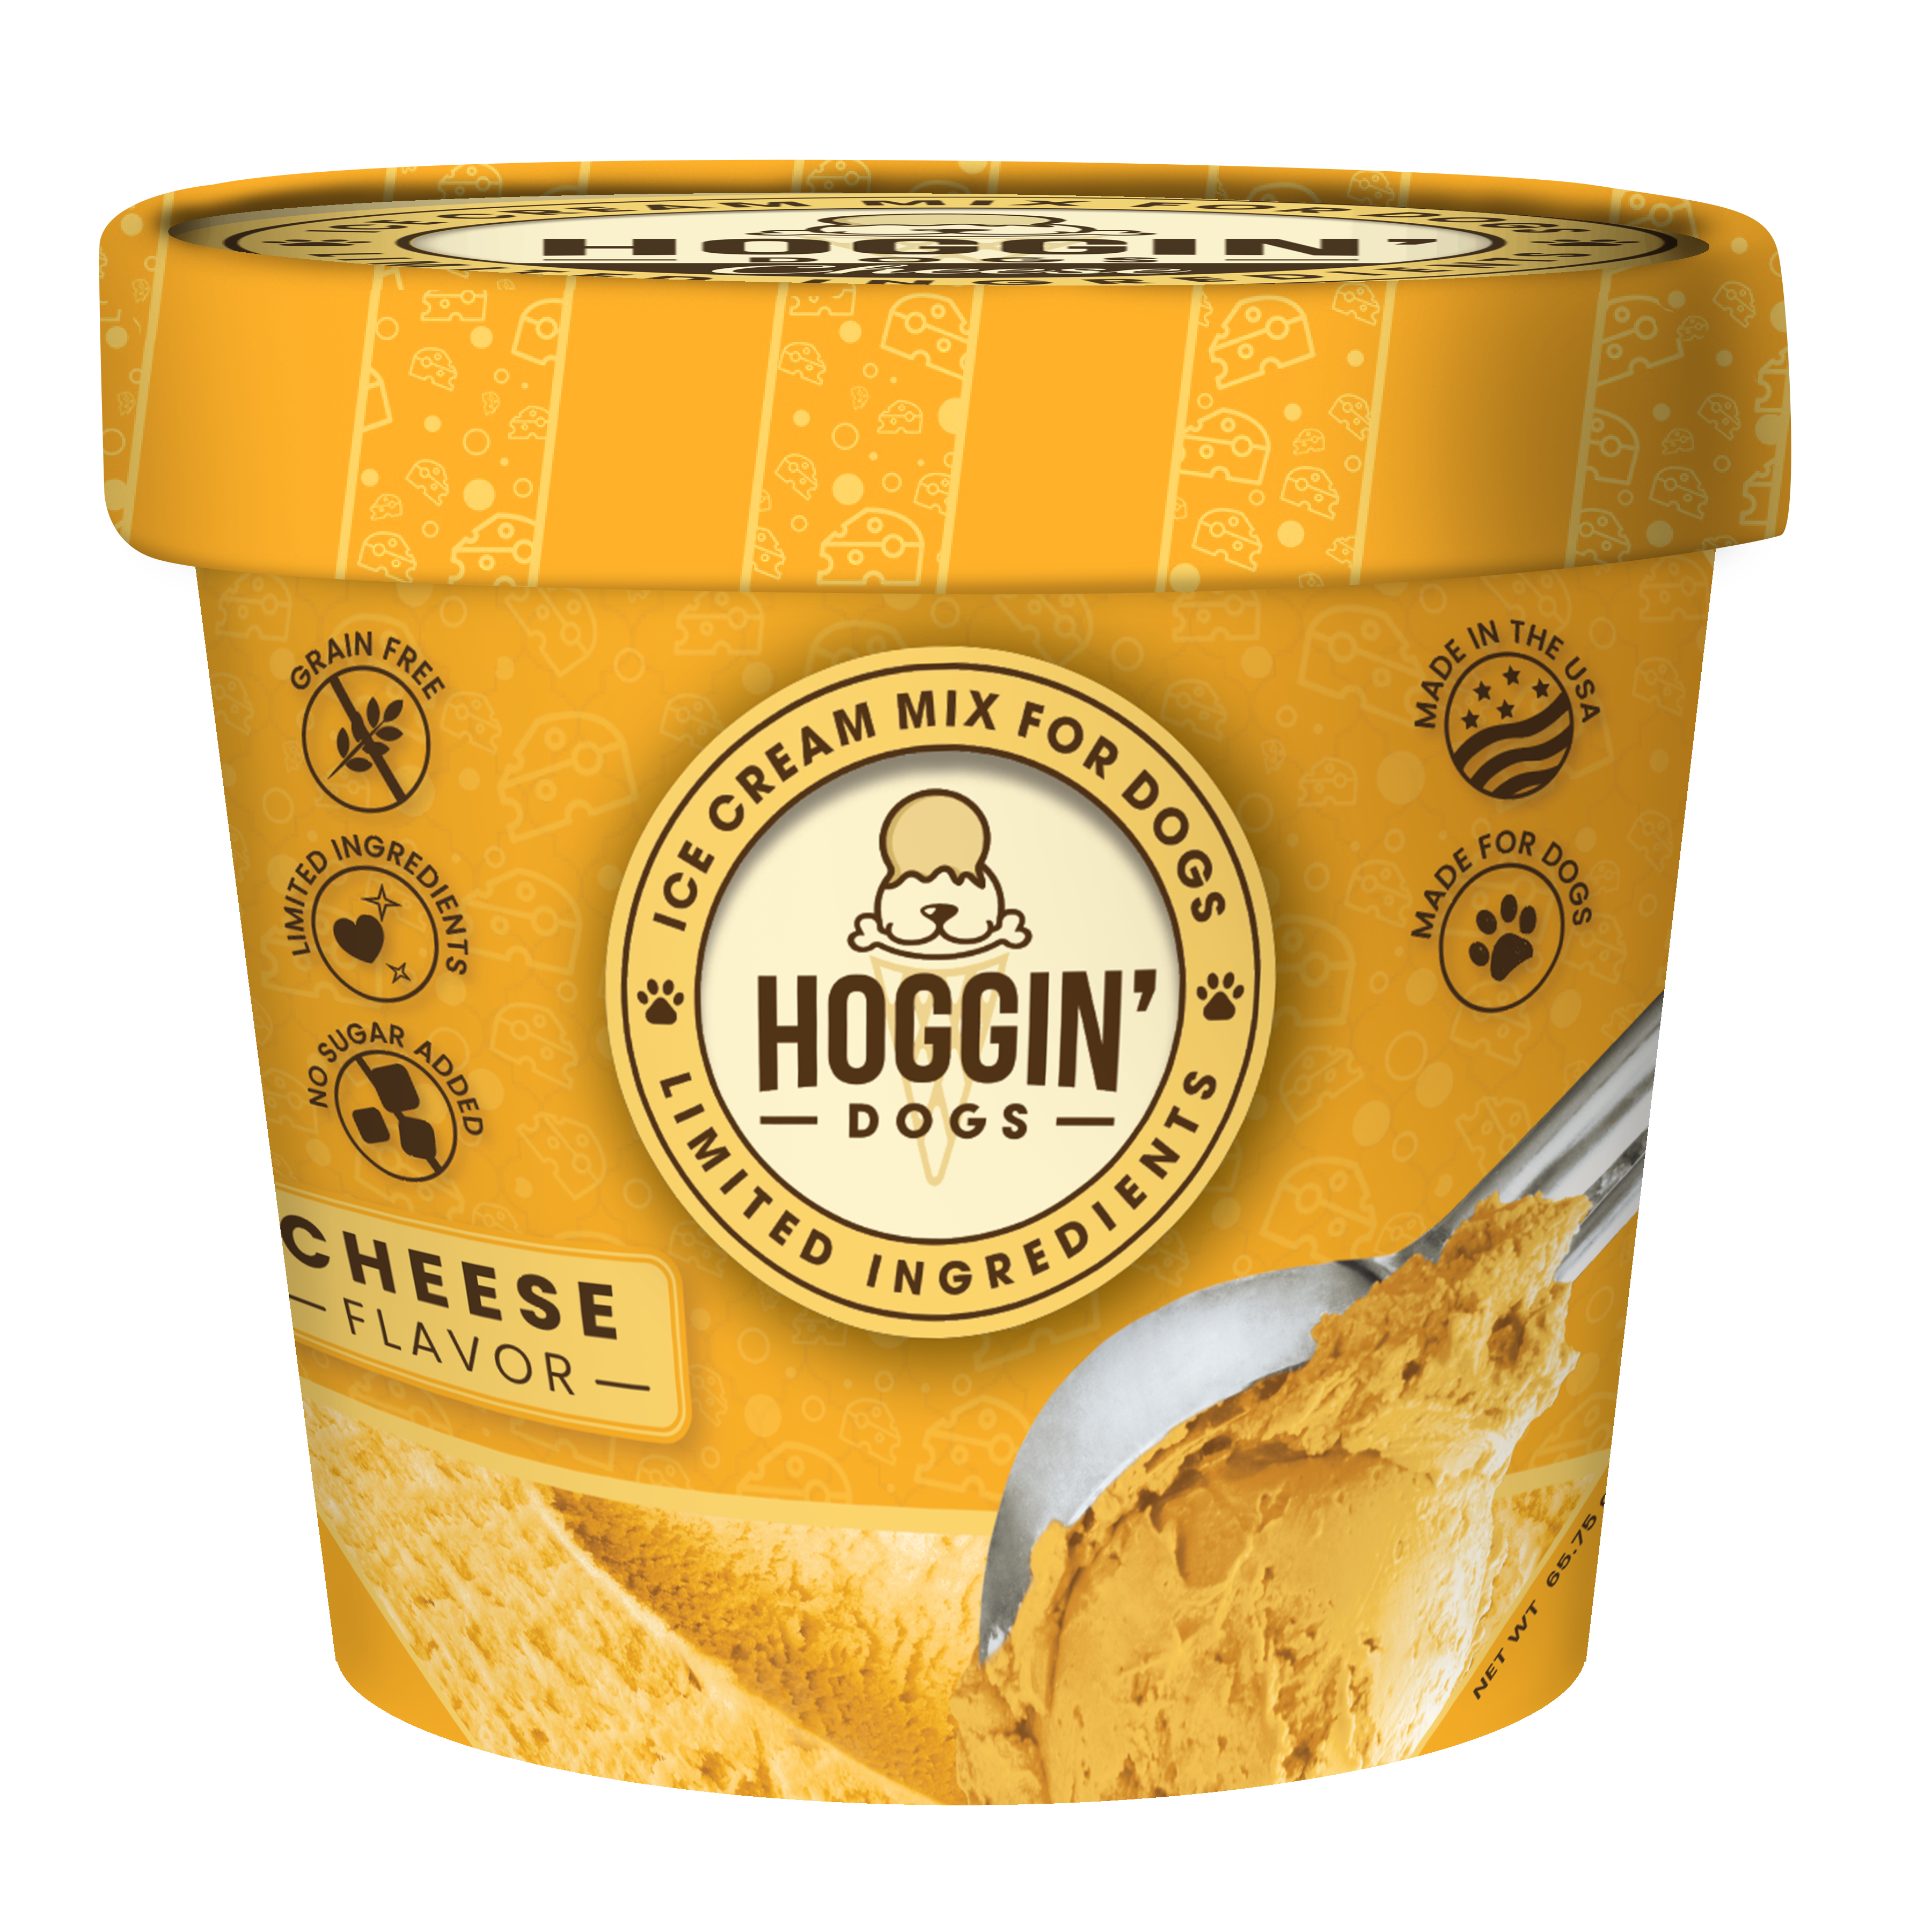 http://puppycake.com/Shared/Images/Product/Hoggin-Dogs-Ice-Cream-Mix-Cheese-Cup-Size-2-32-oz/1272150_3DRenderHogginDogsCH_011422.png